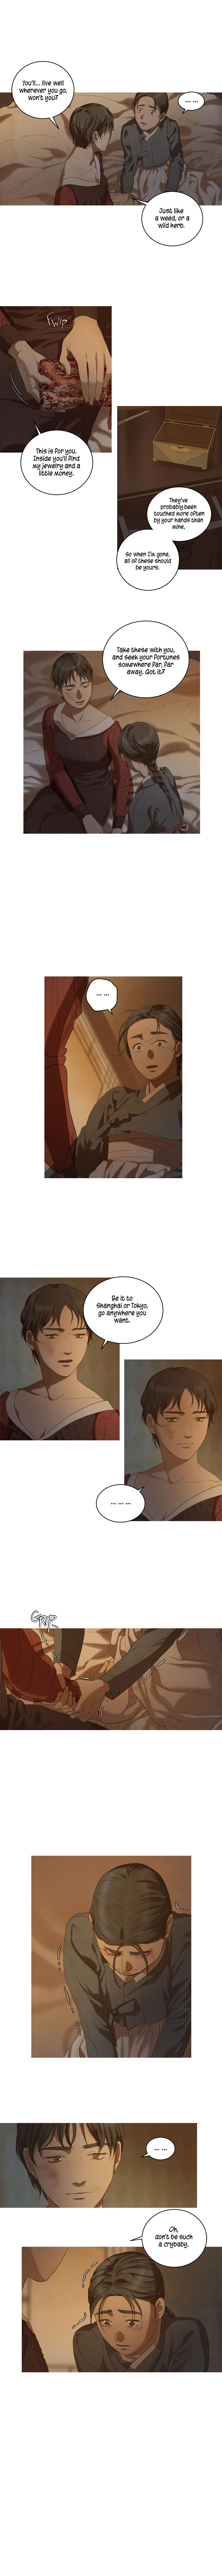 The Whale Star - The Gyeongseong Mermaid - Chapter 13 Page 9